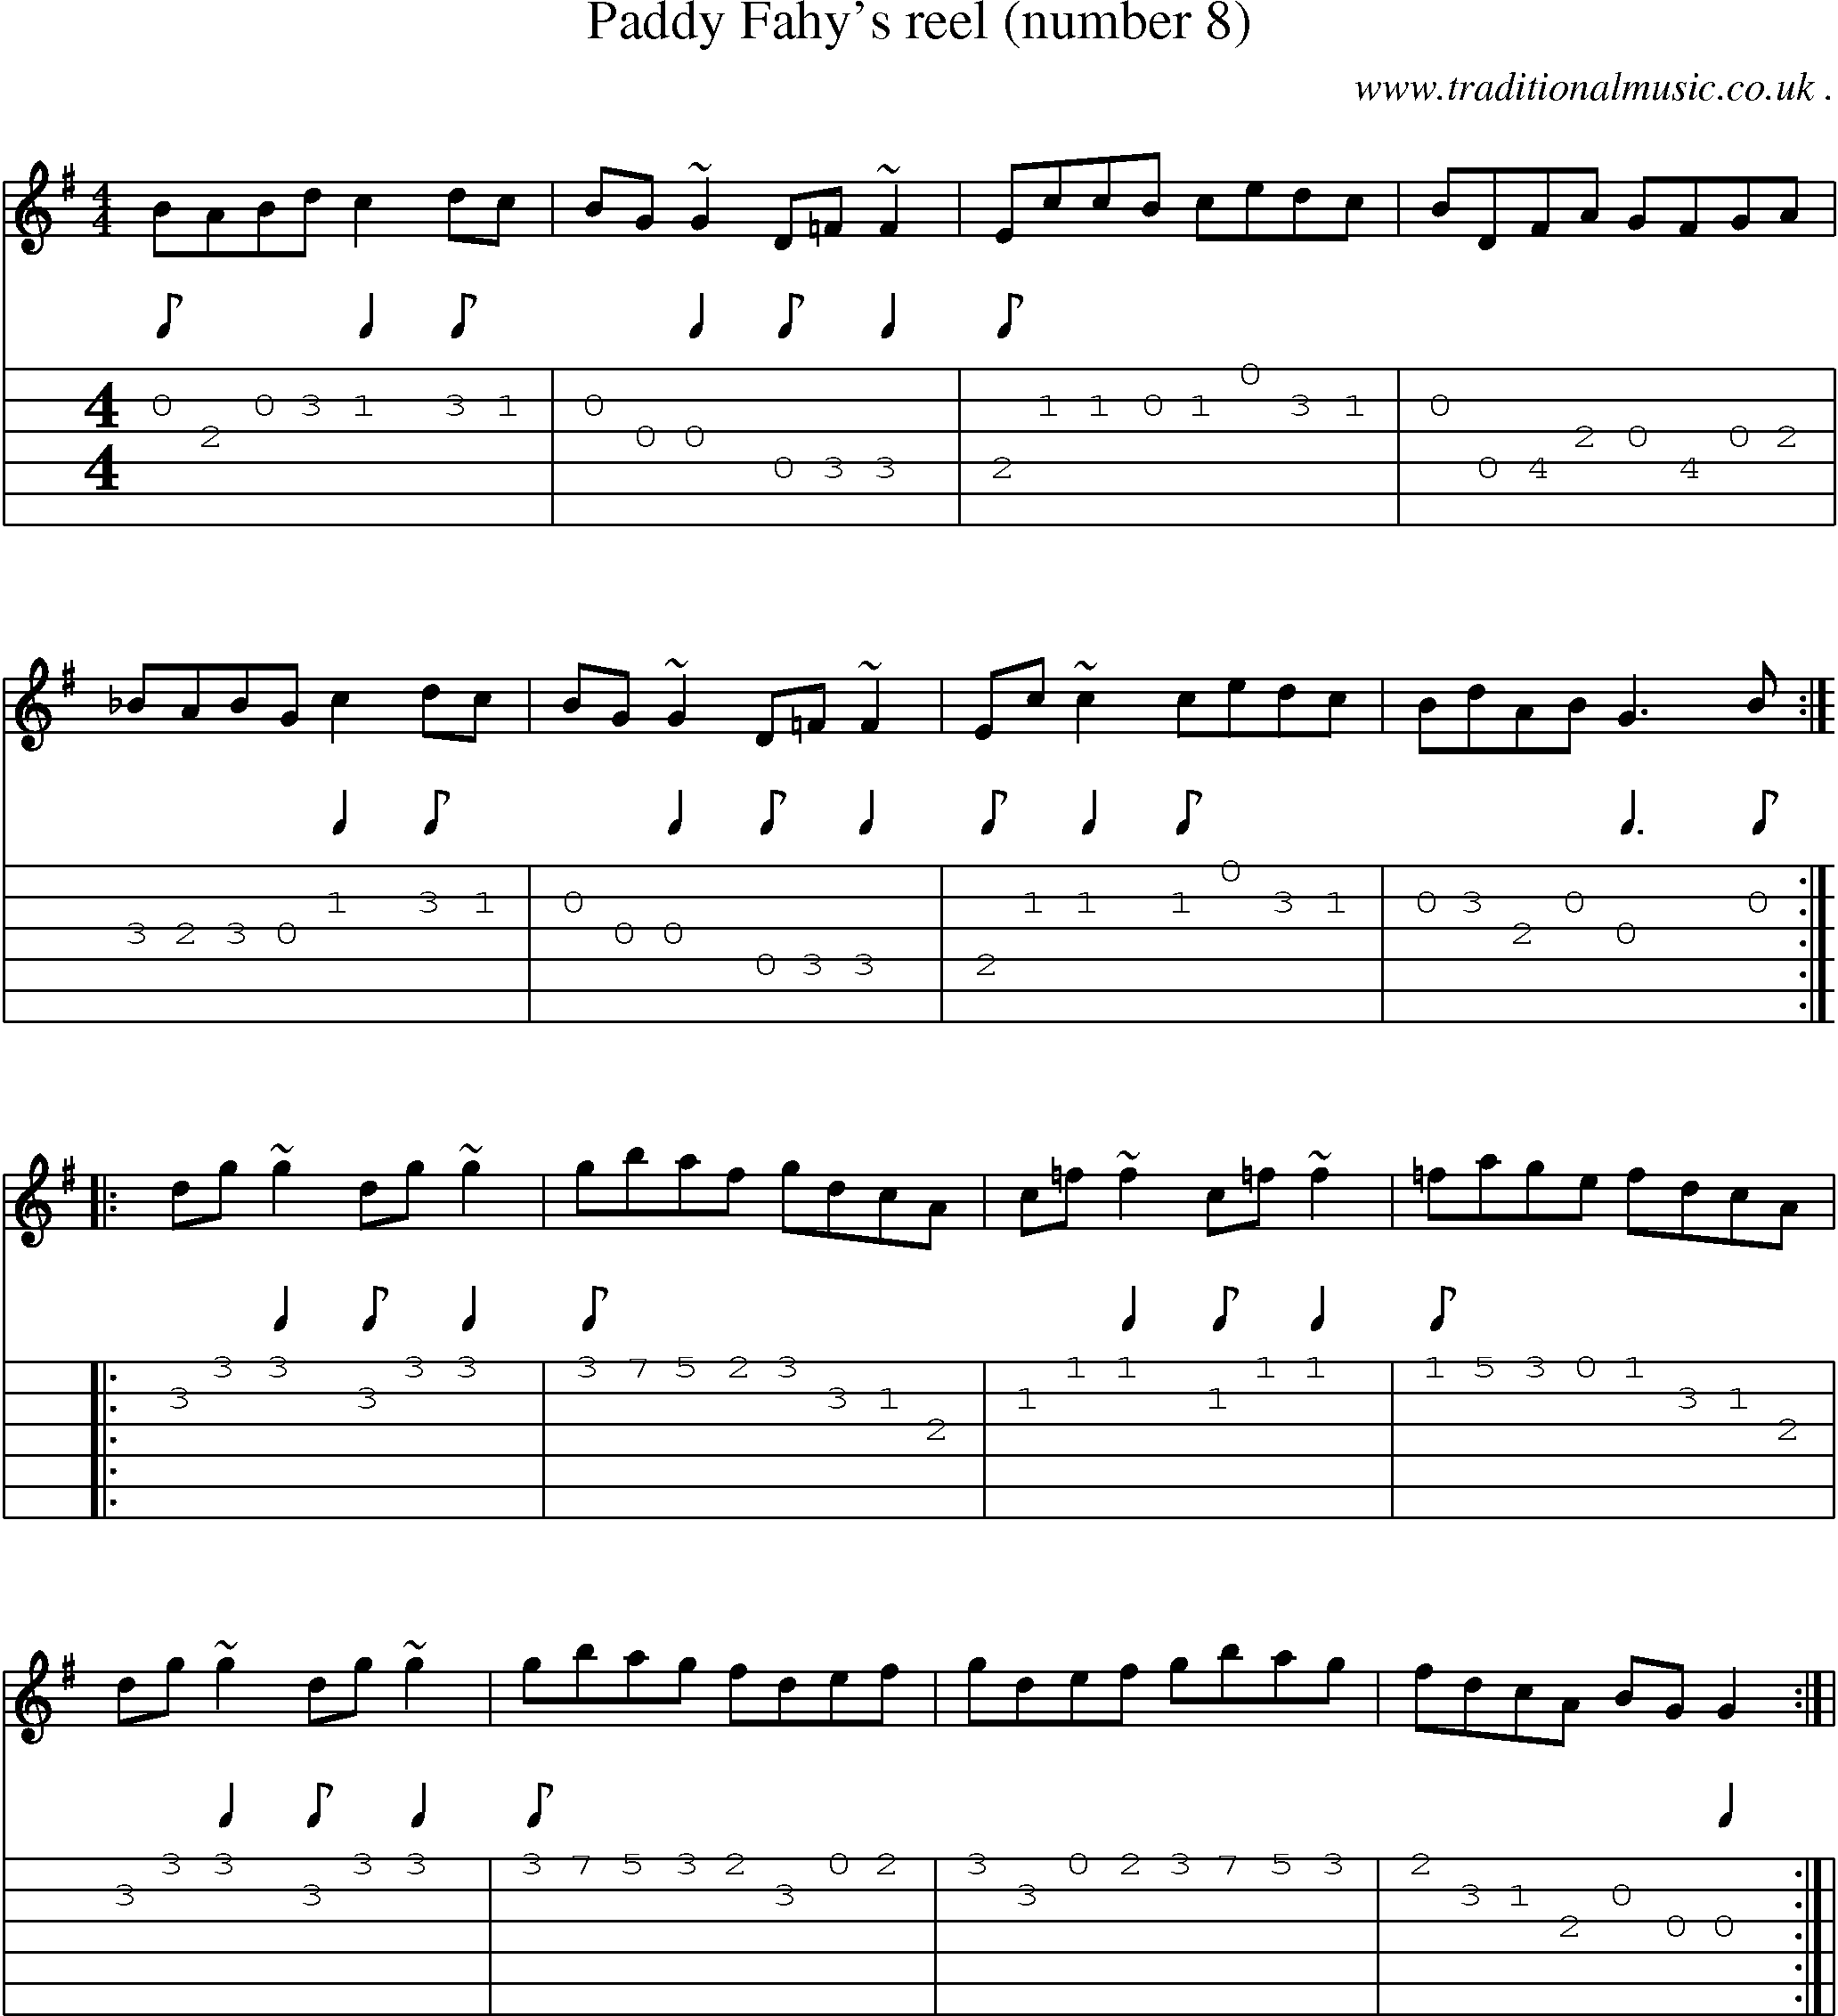 Sheet-music  score, Chords and Guitar Tabs for Paddy Fahys Reel Number 8